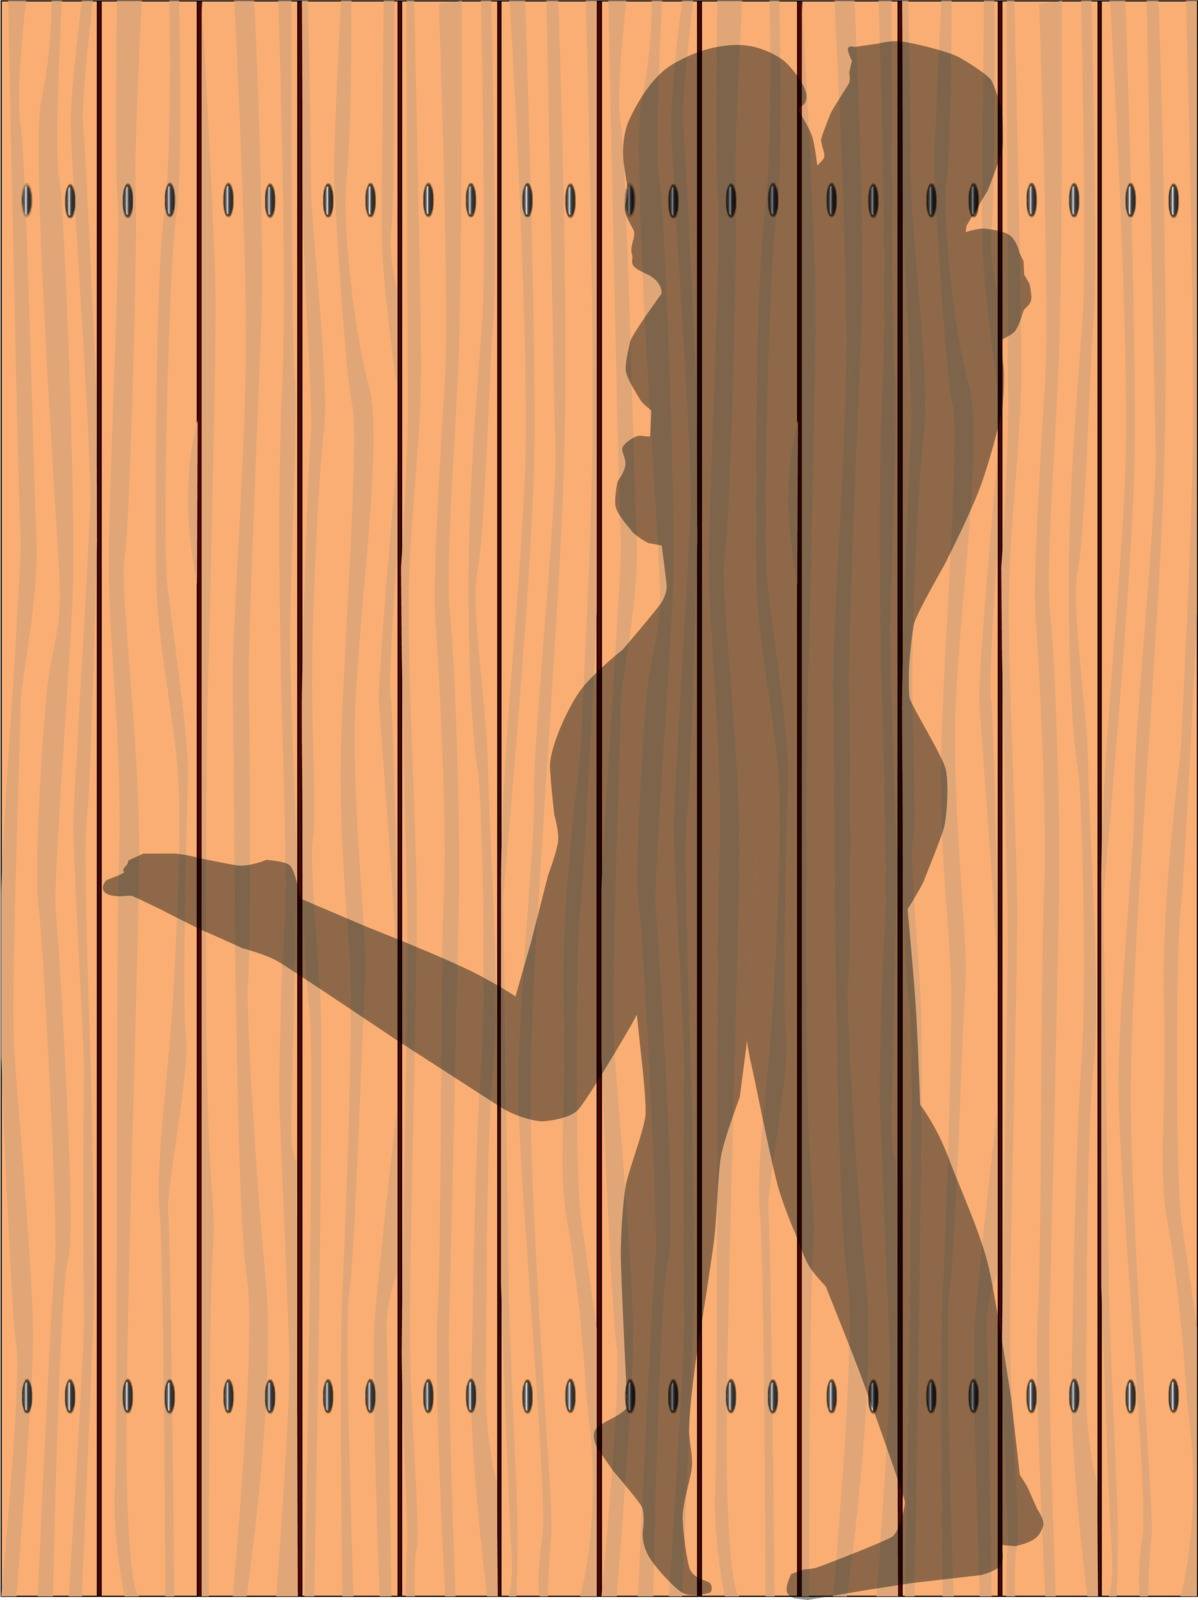 A silhouette of a kissing couple on a wooden fence